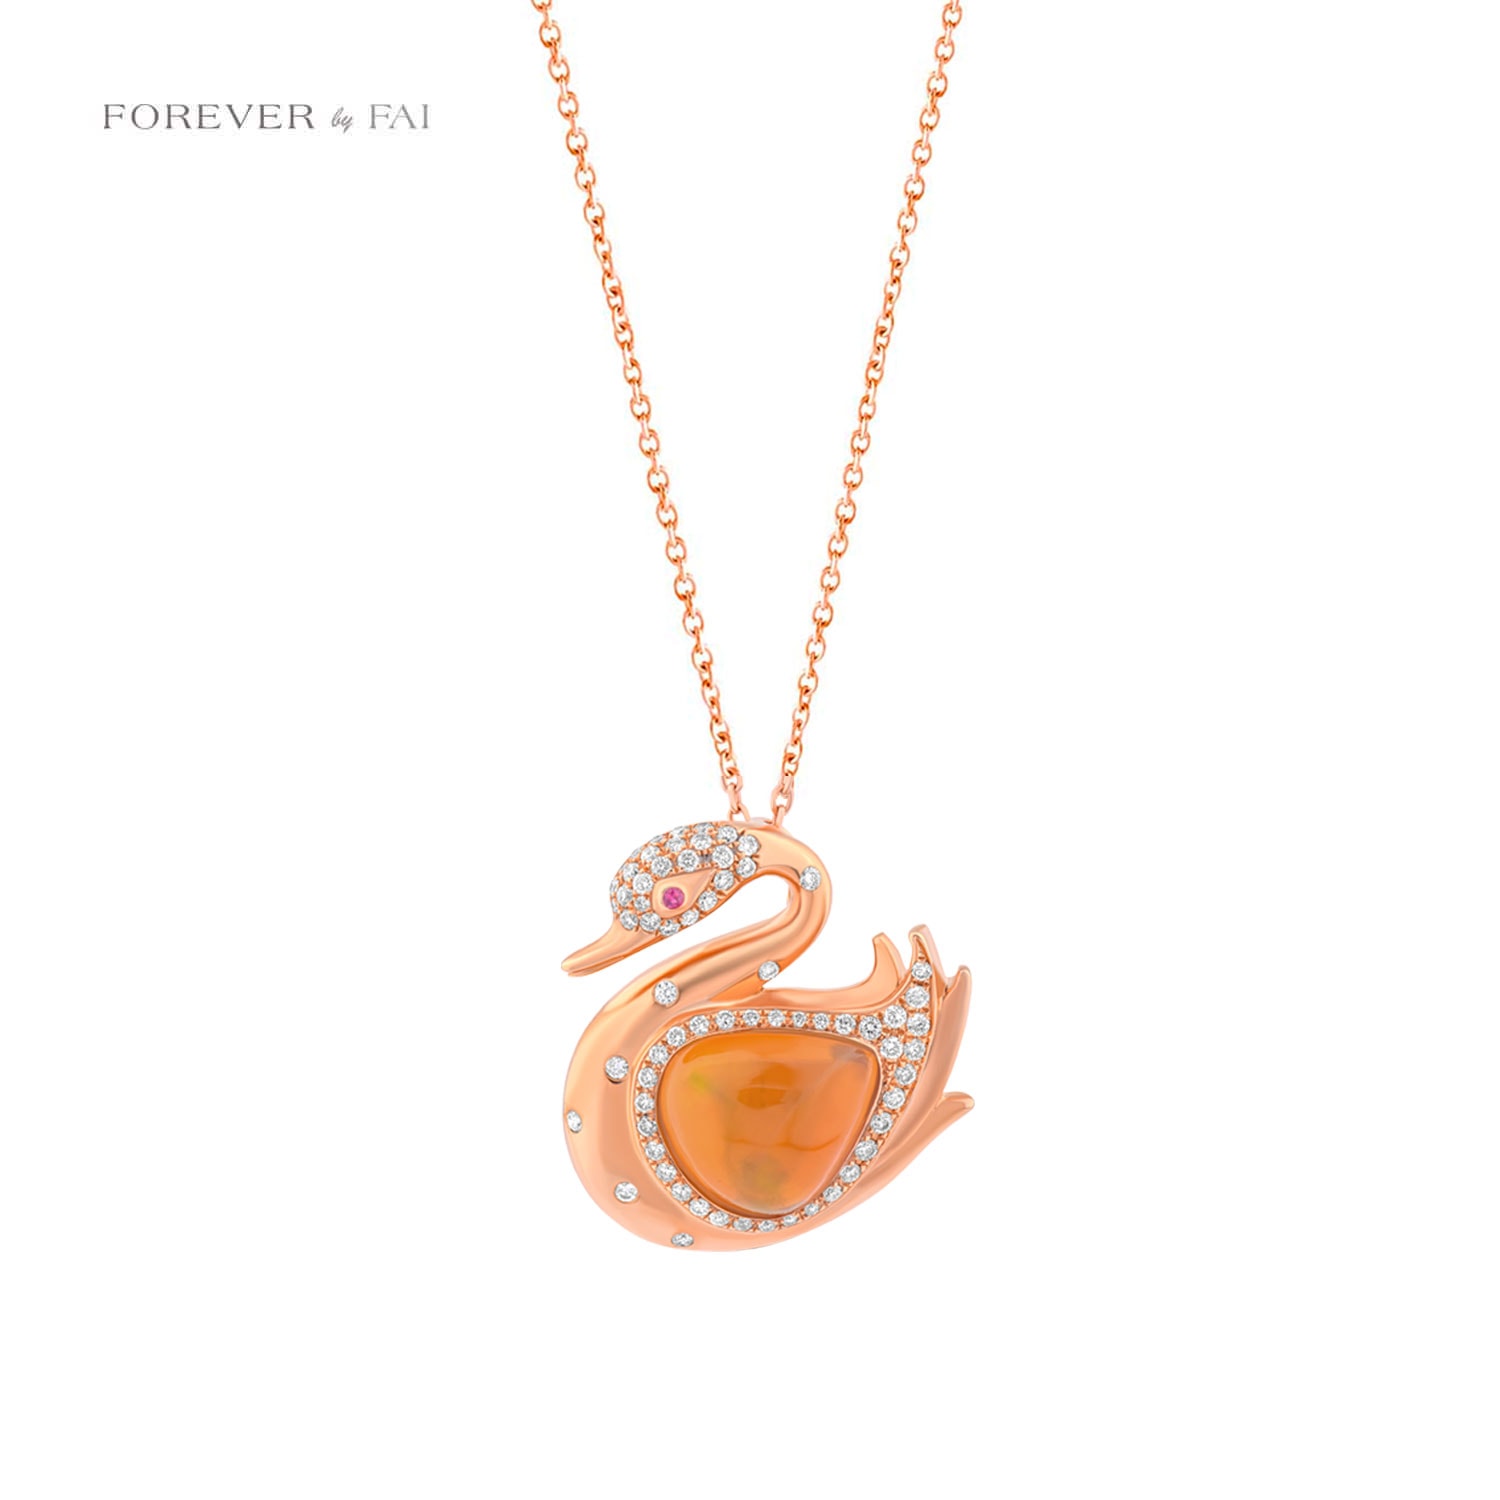 Swan Pendant Necklace in Solid Gold (Yellow/Rose/White)